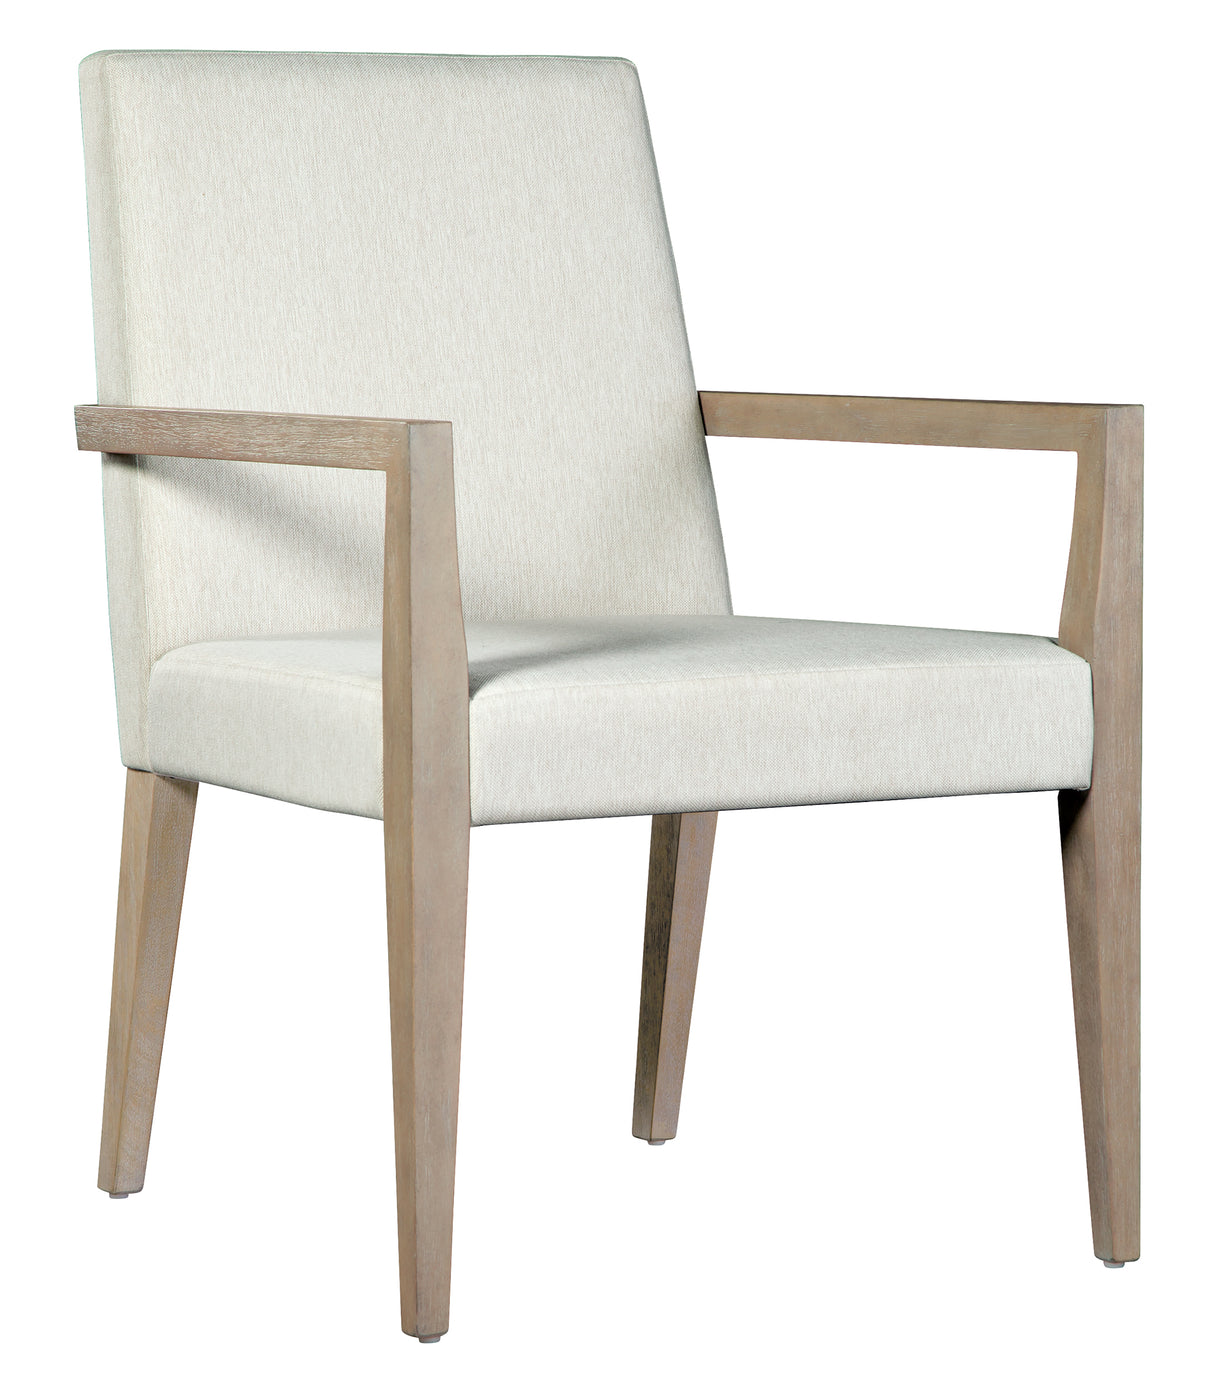 Hekman 25322 Scottsdale 24in. x 25.25in. x 35.25in. Upholstered Dining Arm Chair